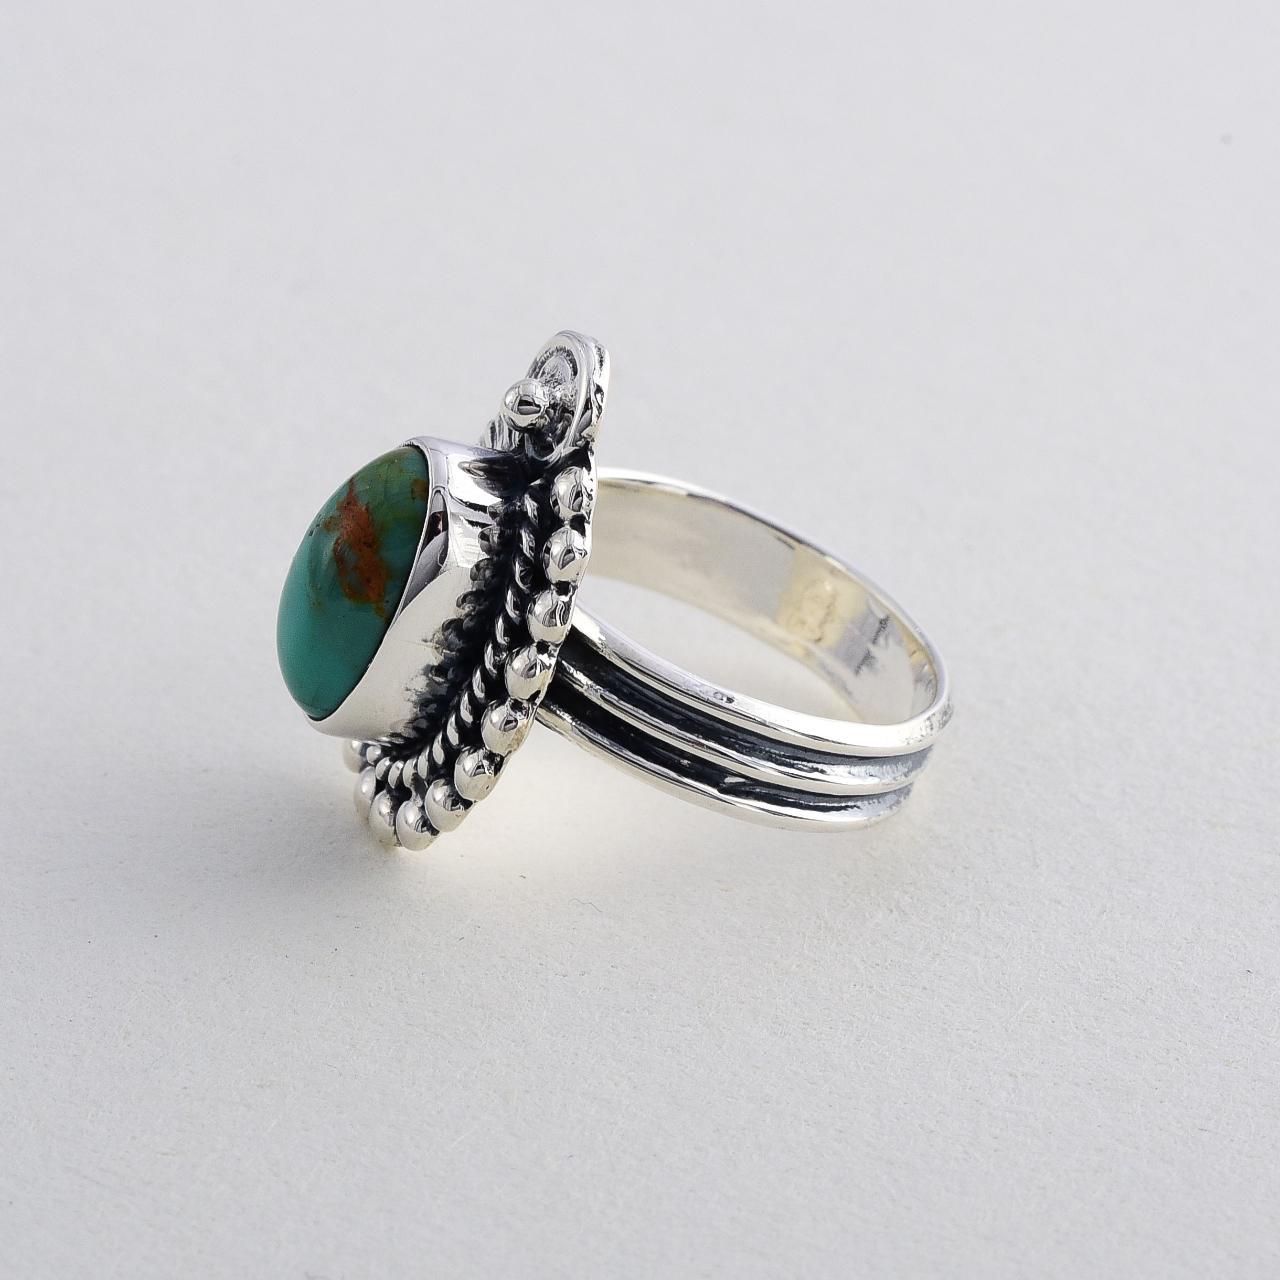 Product Image 3 - Sterling 925 Turquoise Ring

Sterling Silver

Size